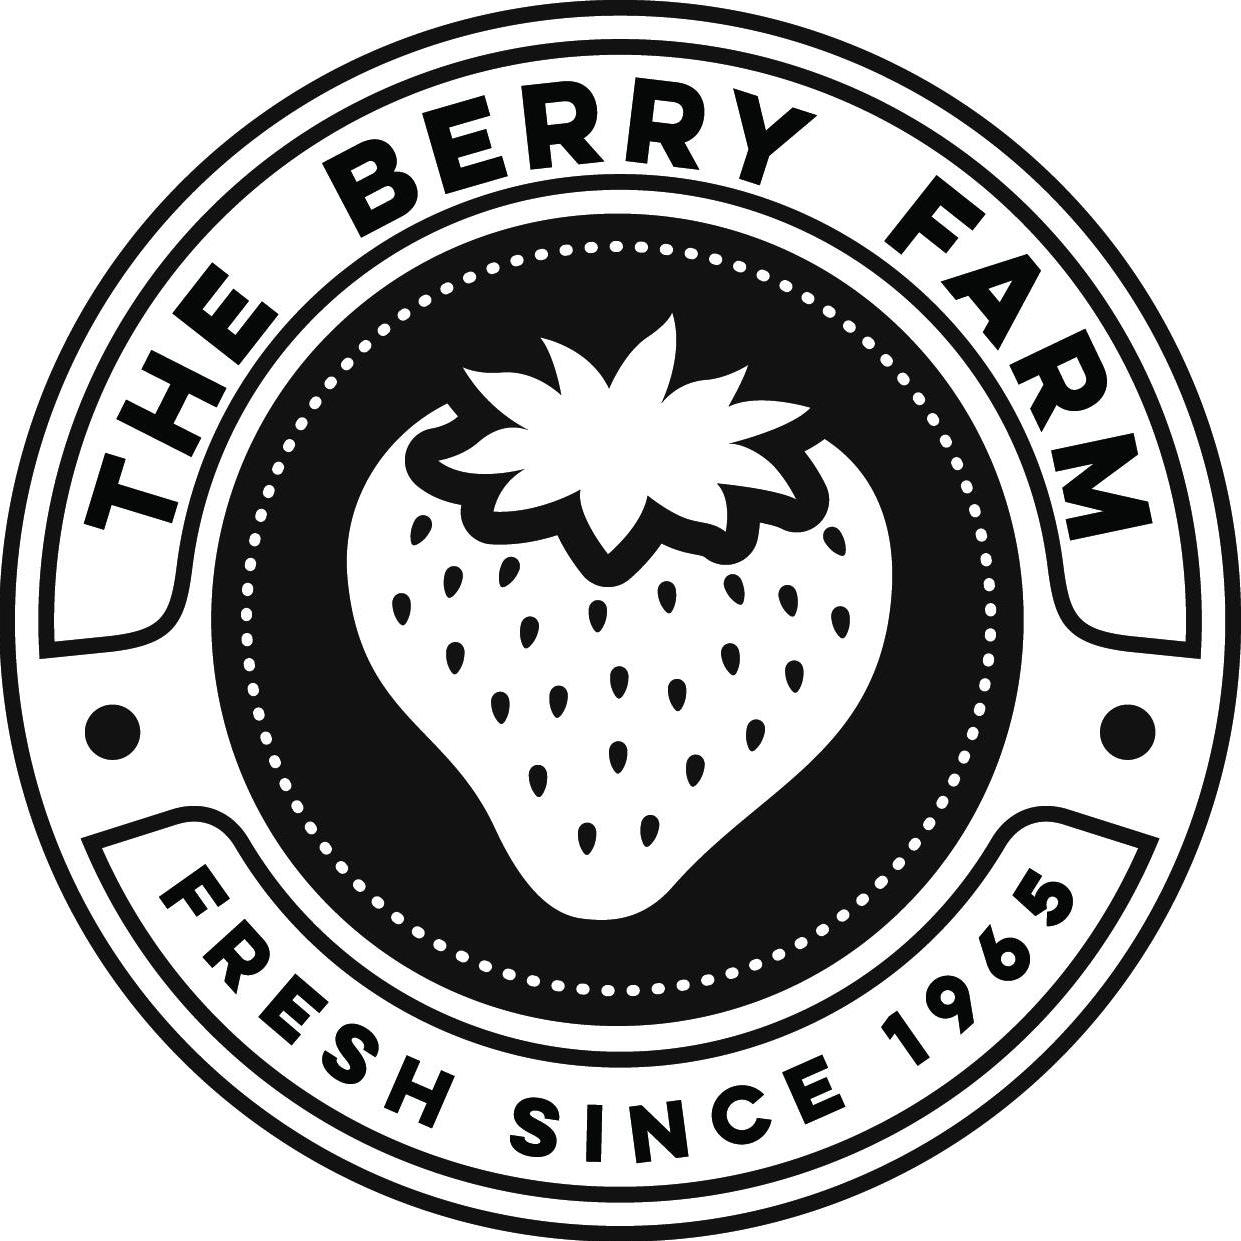 Business logo of The Berry Farms